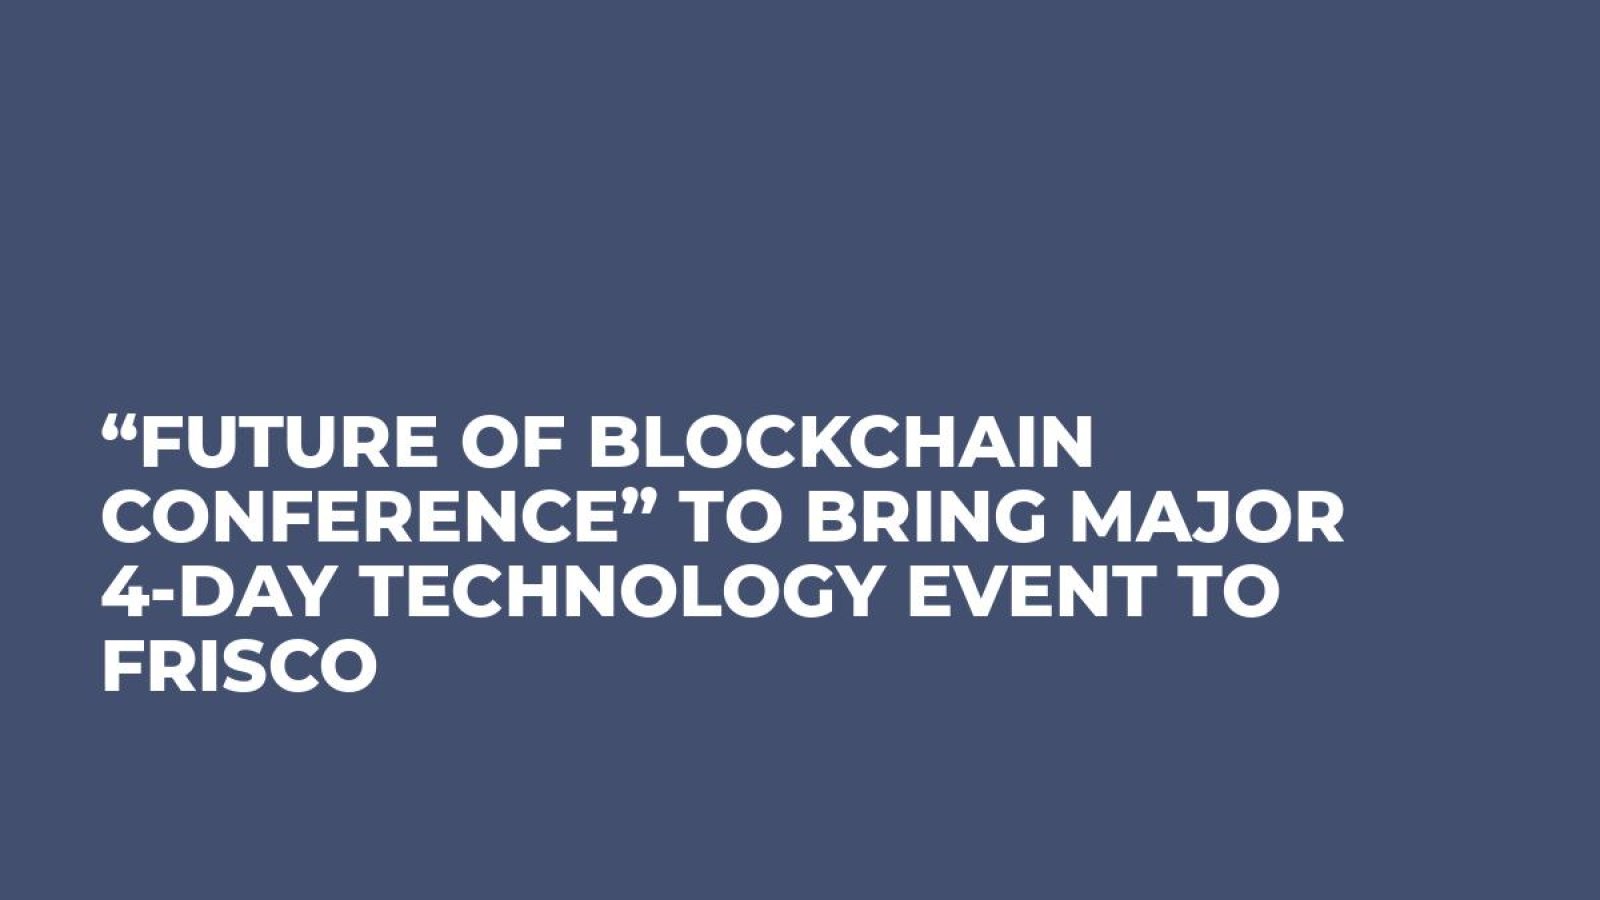 “Future of Blockchain Conference” to Bring Major 4-Day Technology Event to Frisco